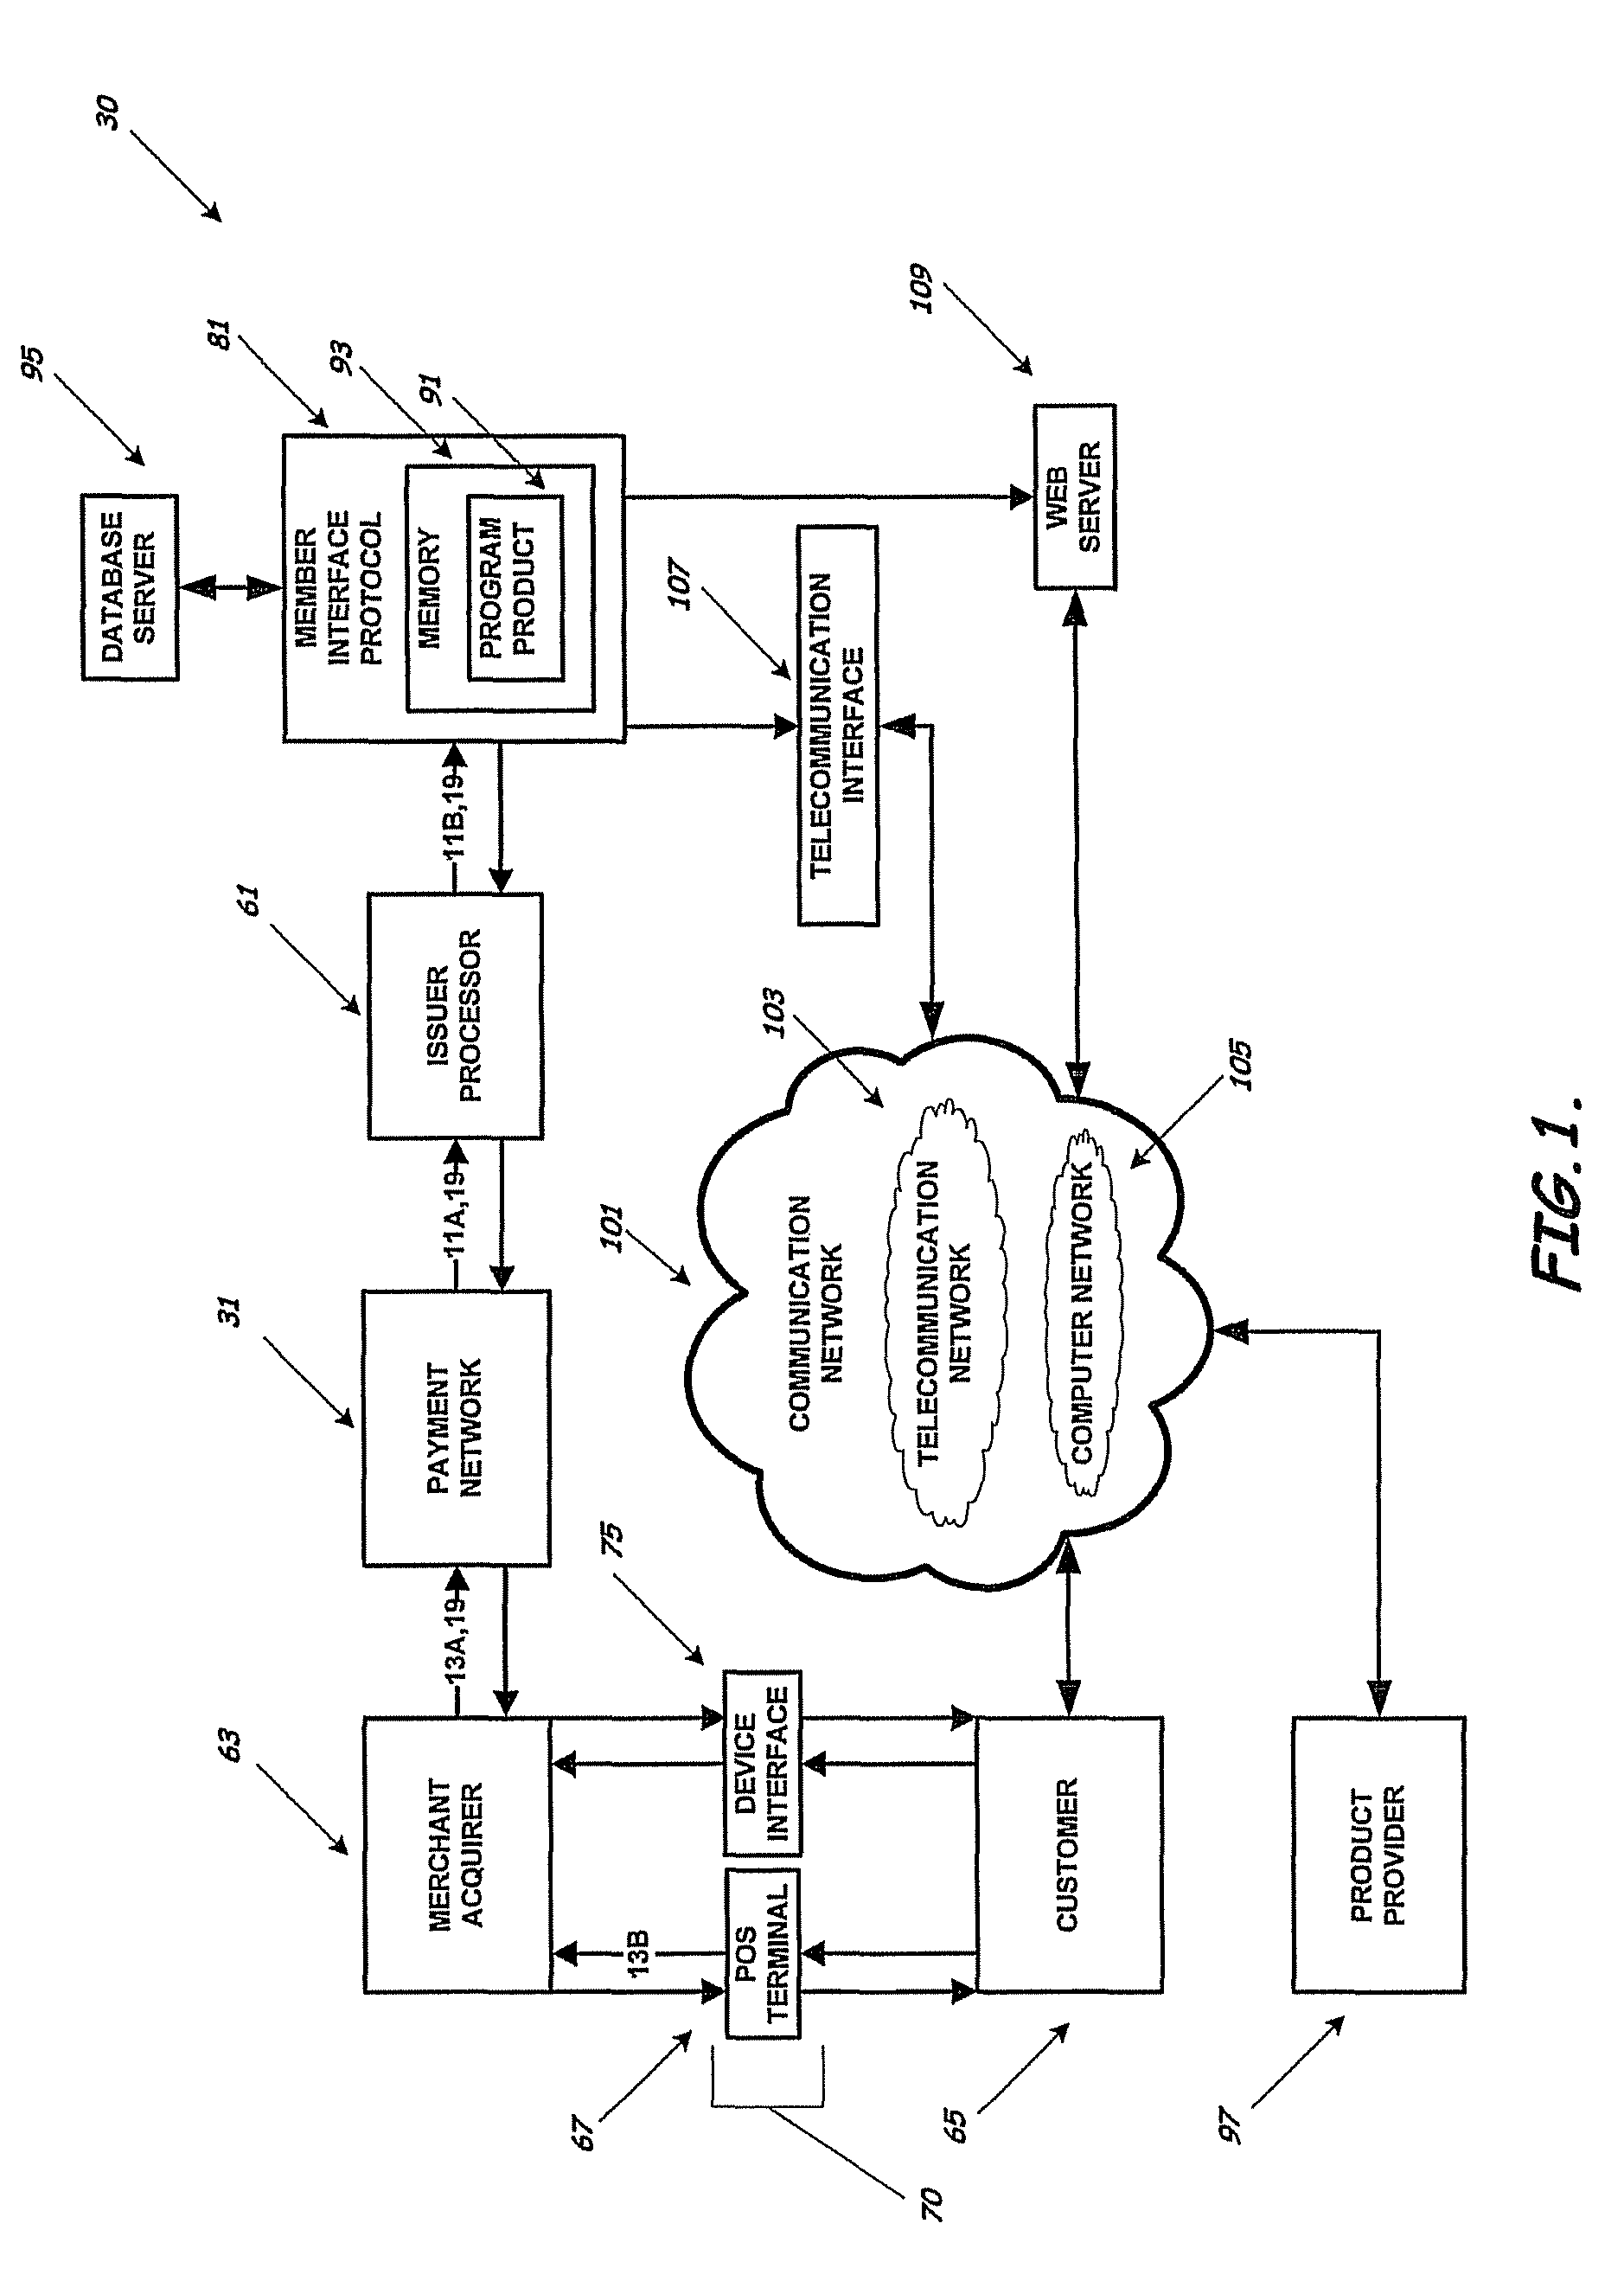 Machine, methods, and program product for electronic order entry